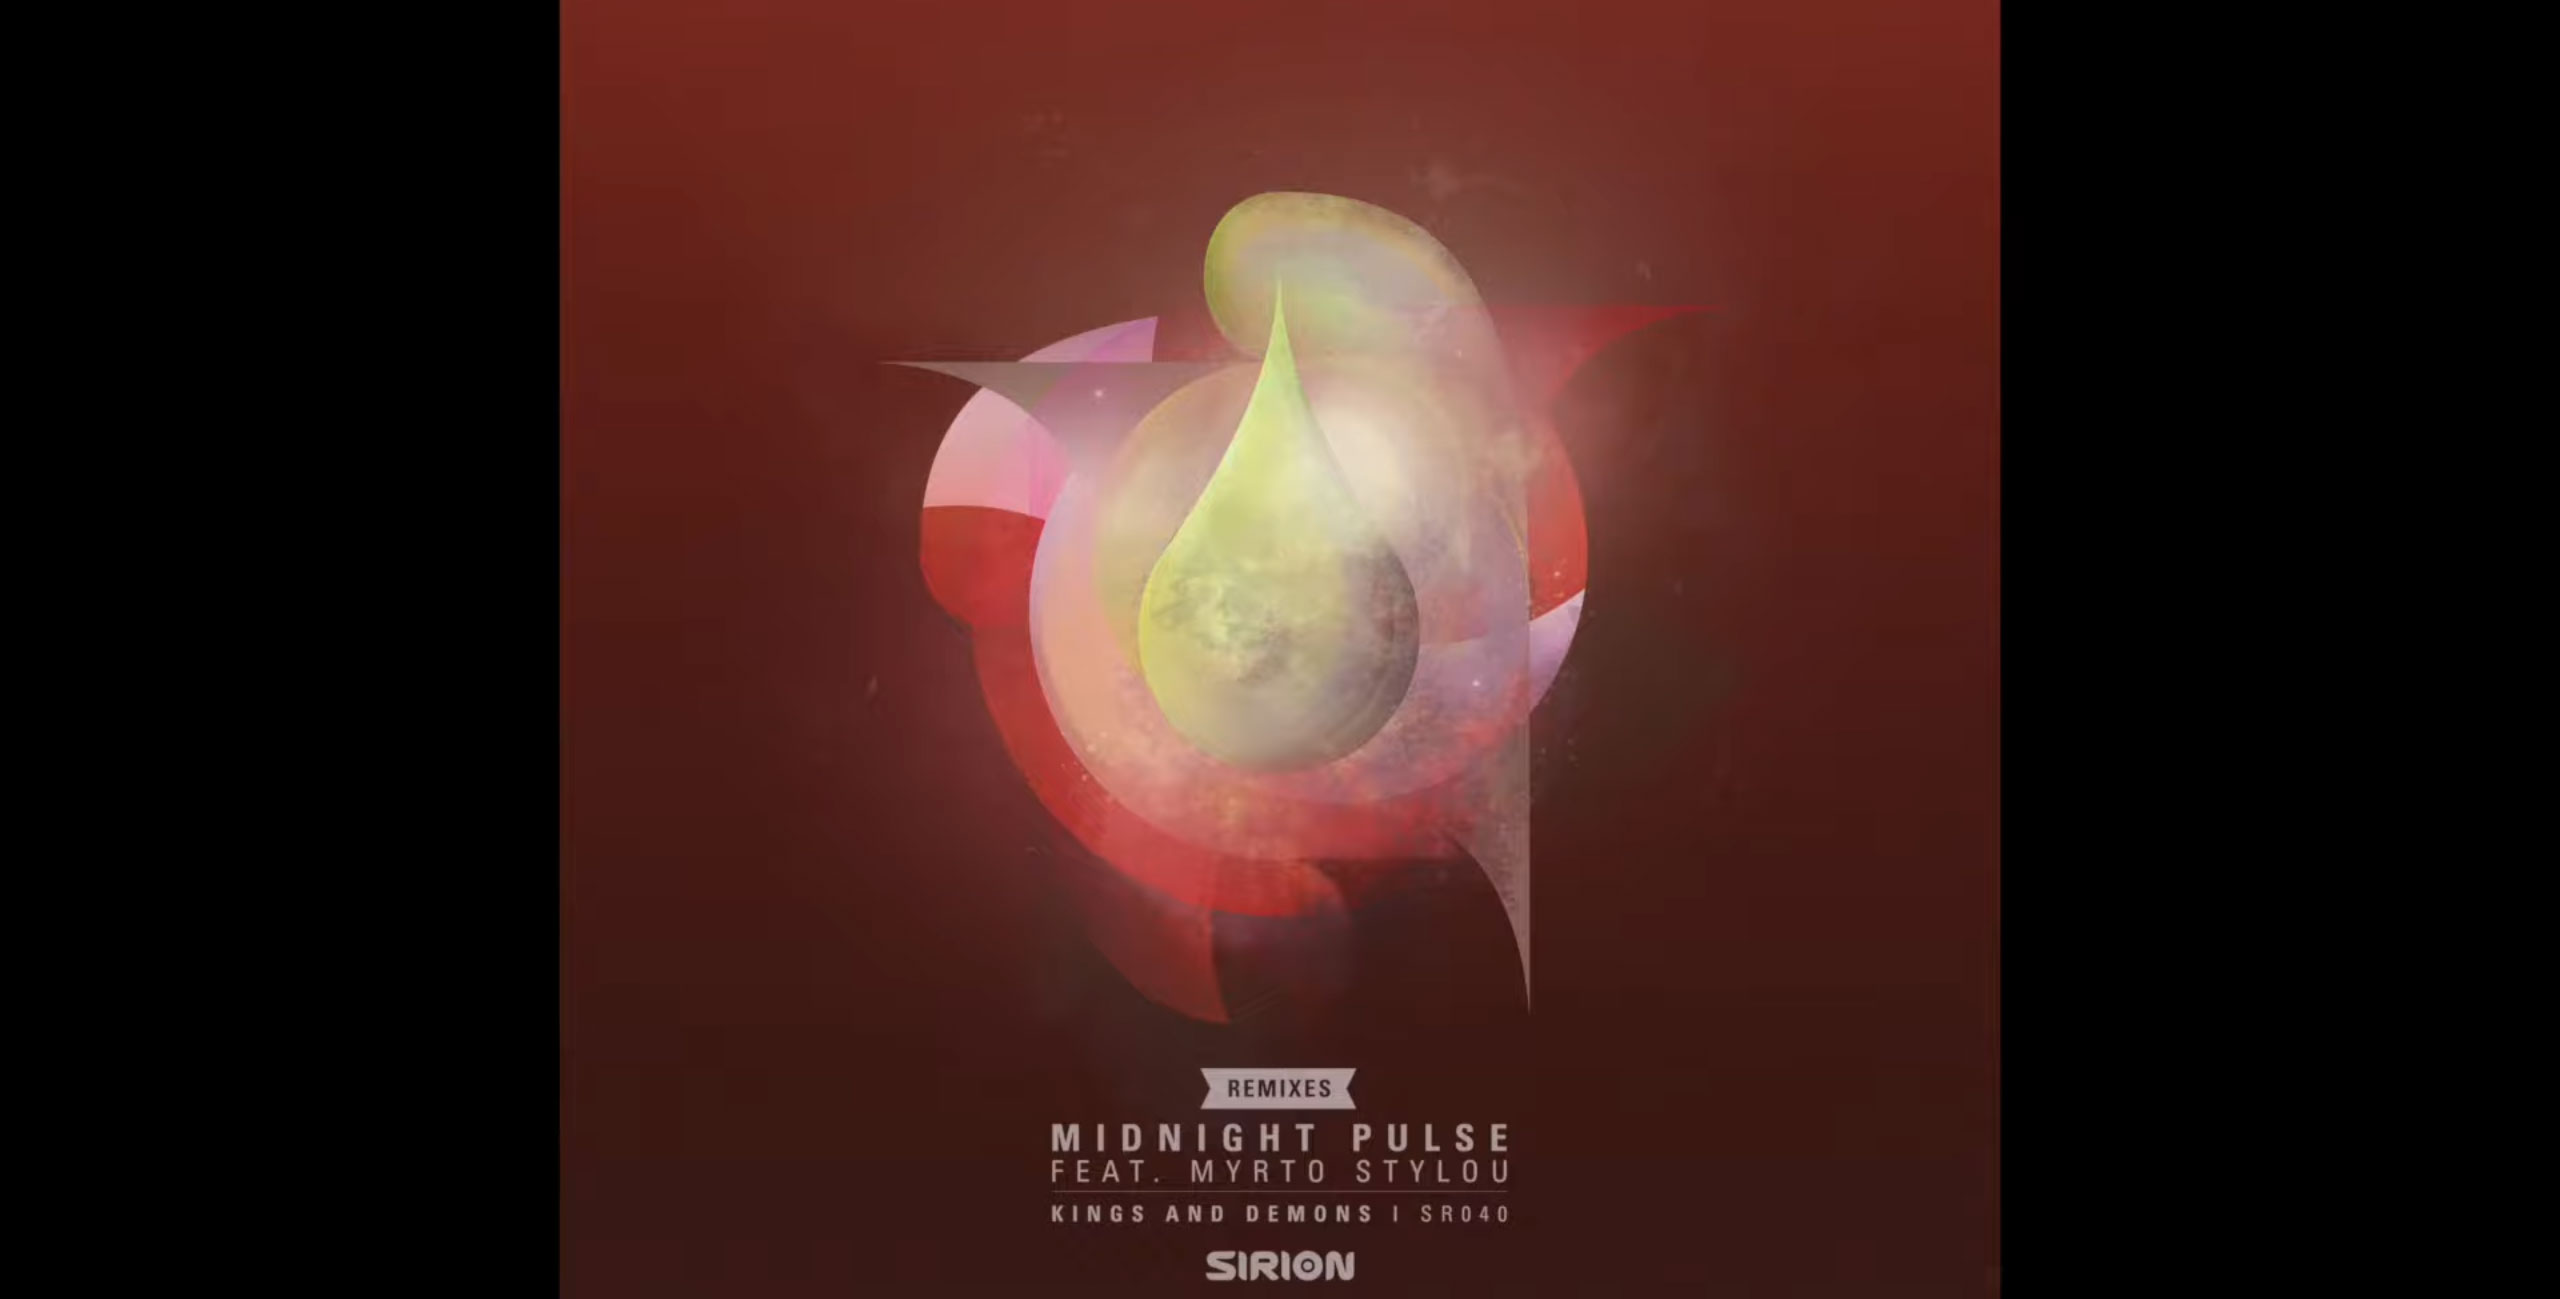 Midnight Pulse -  Kings and Demons feat. Myrto Stylou -  Pablo Bolivar Remake - SirionRecords